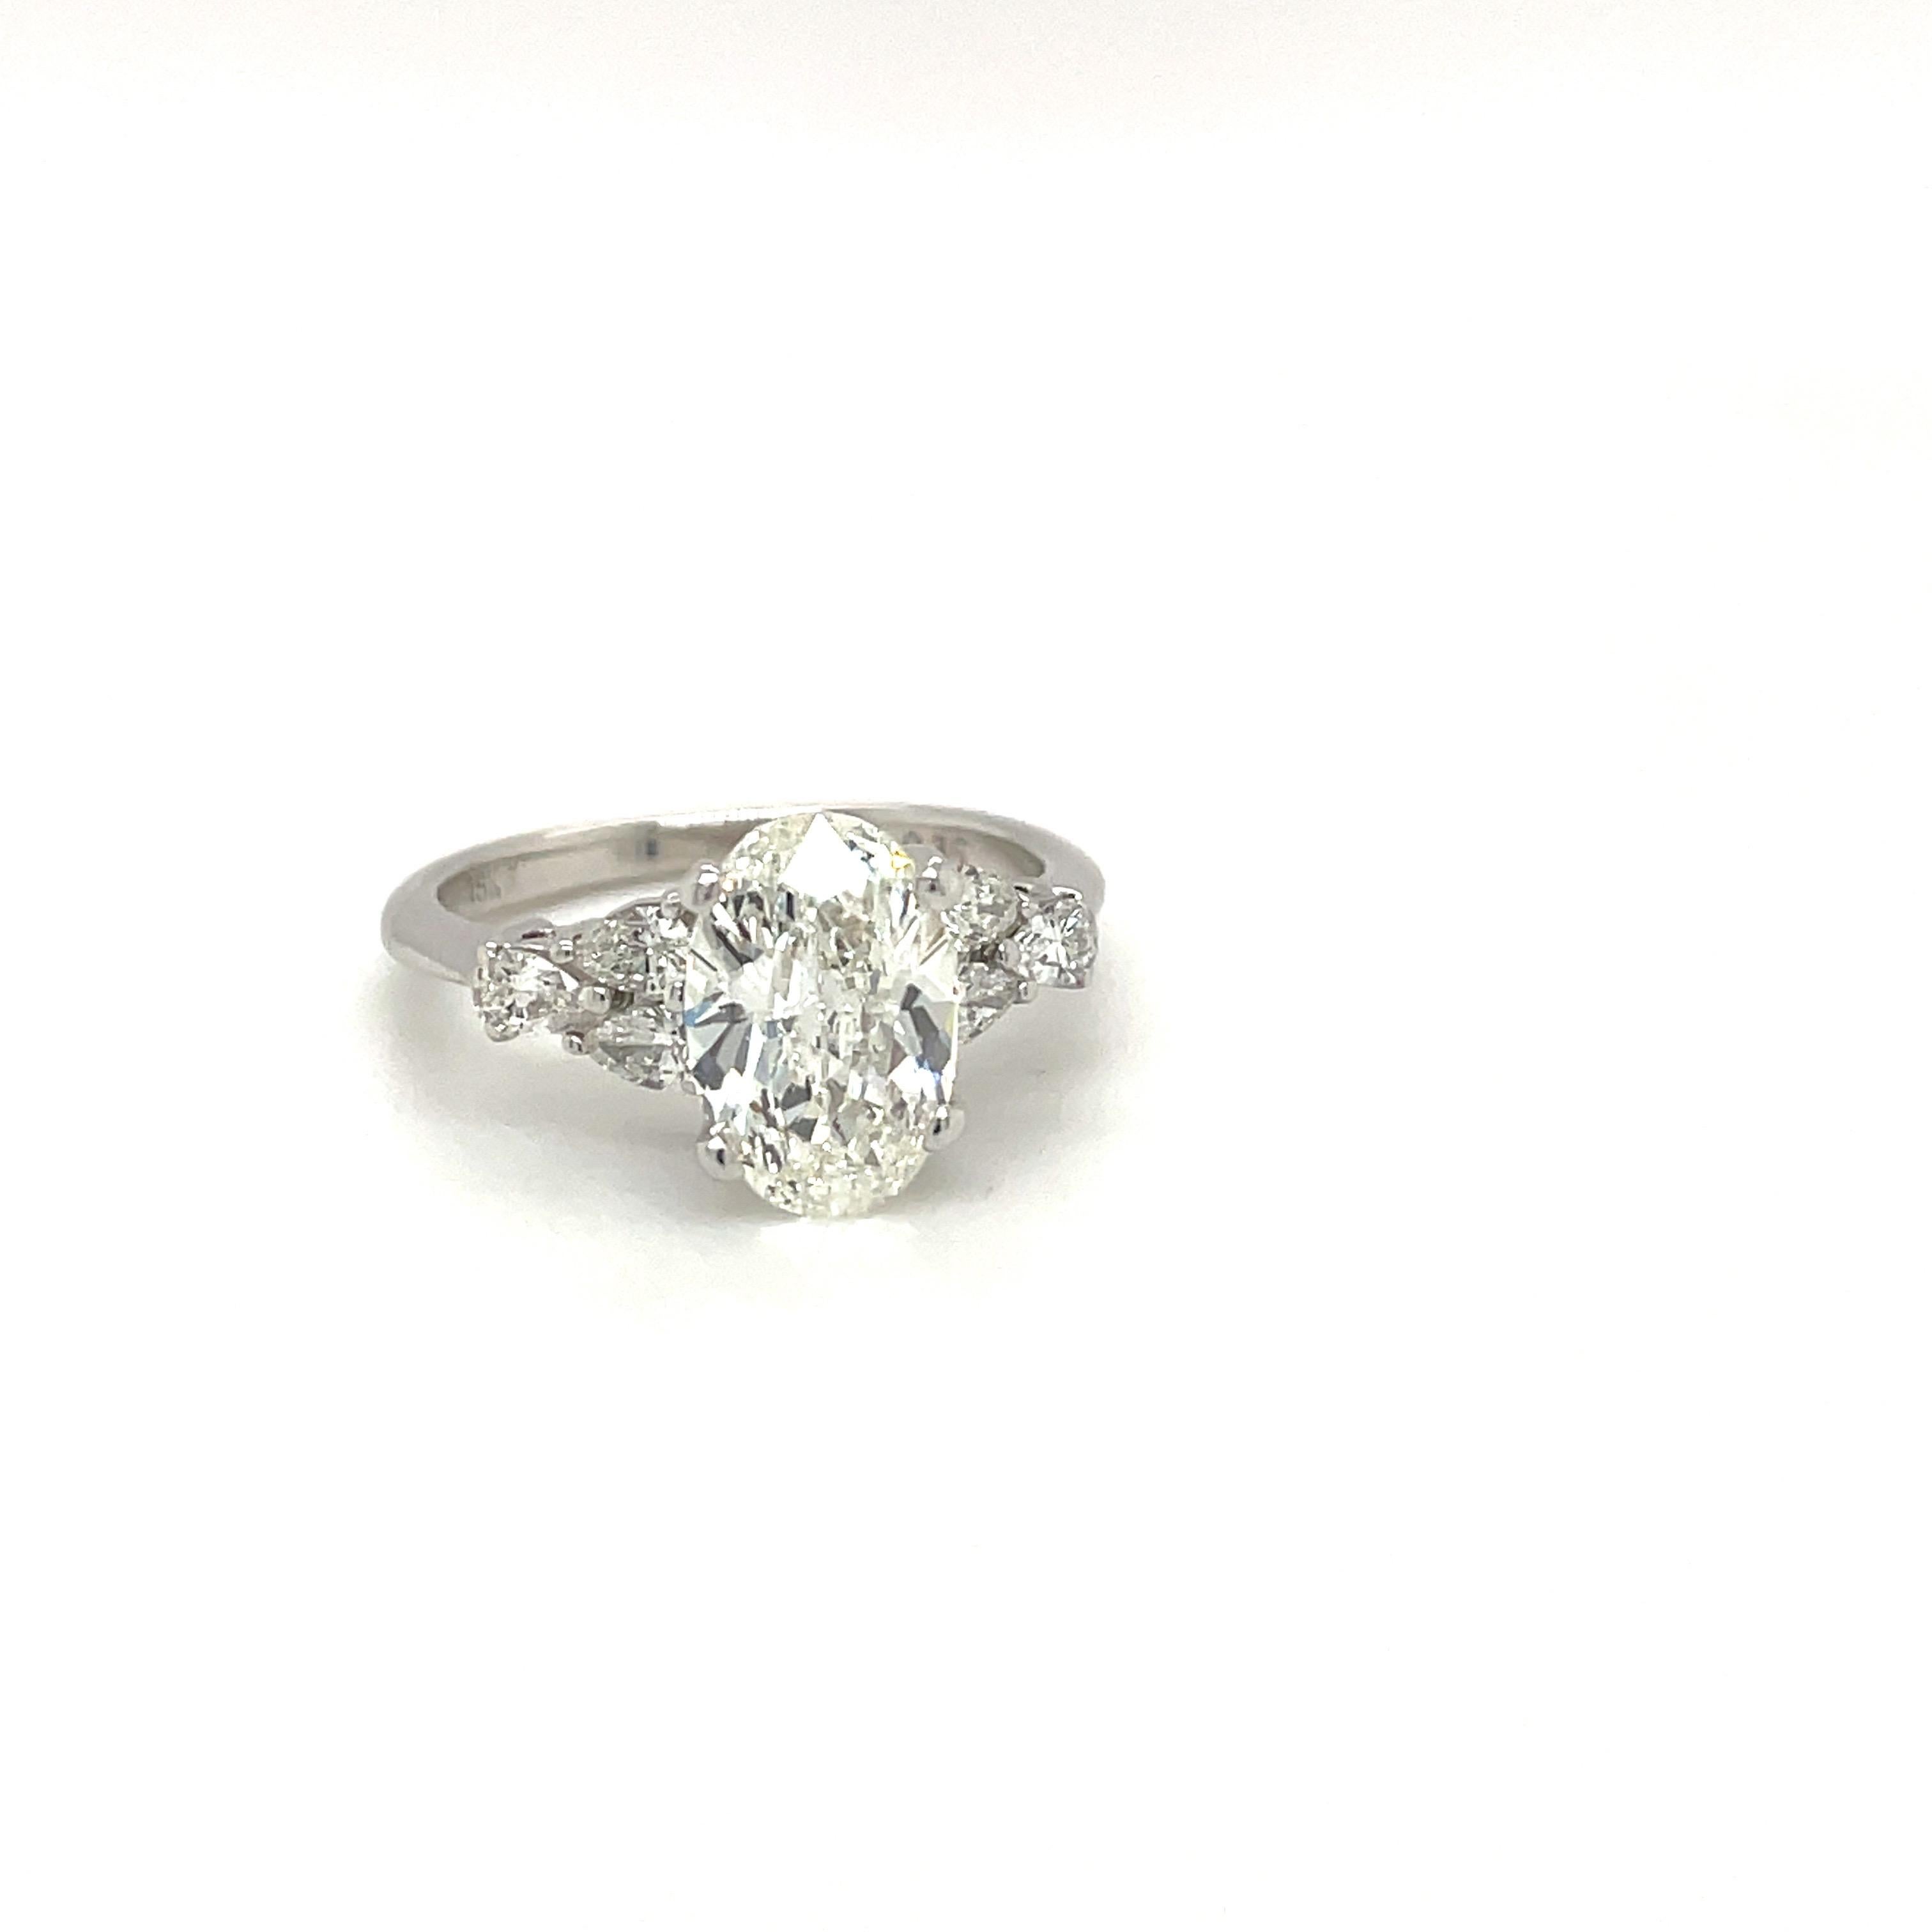 Beautiful oval diamond center stone ring. The GIA certified oval diamond weighs 1.71 carats , H color VS1 in clarity. The center stone is mounted in a platinum setting with 6 pear shaped 0.35 carats diamonds ,3 on each side that form a triangular